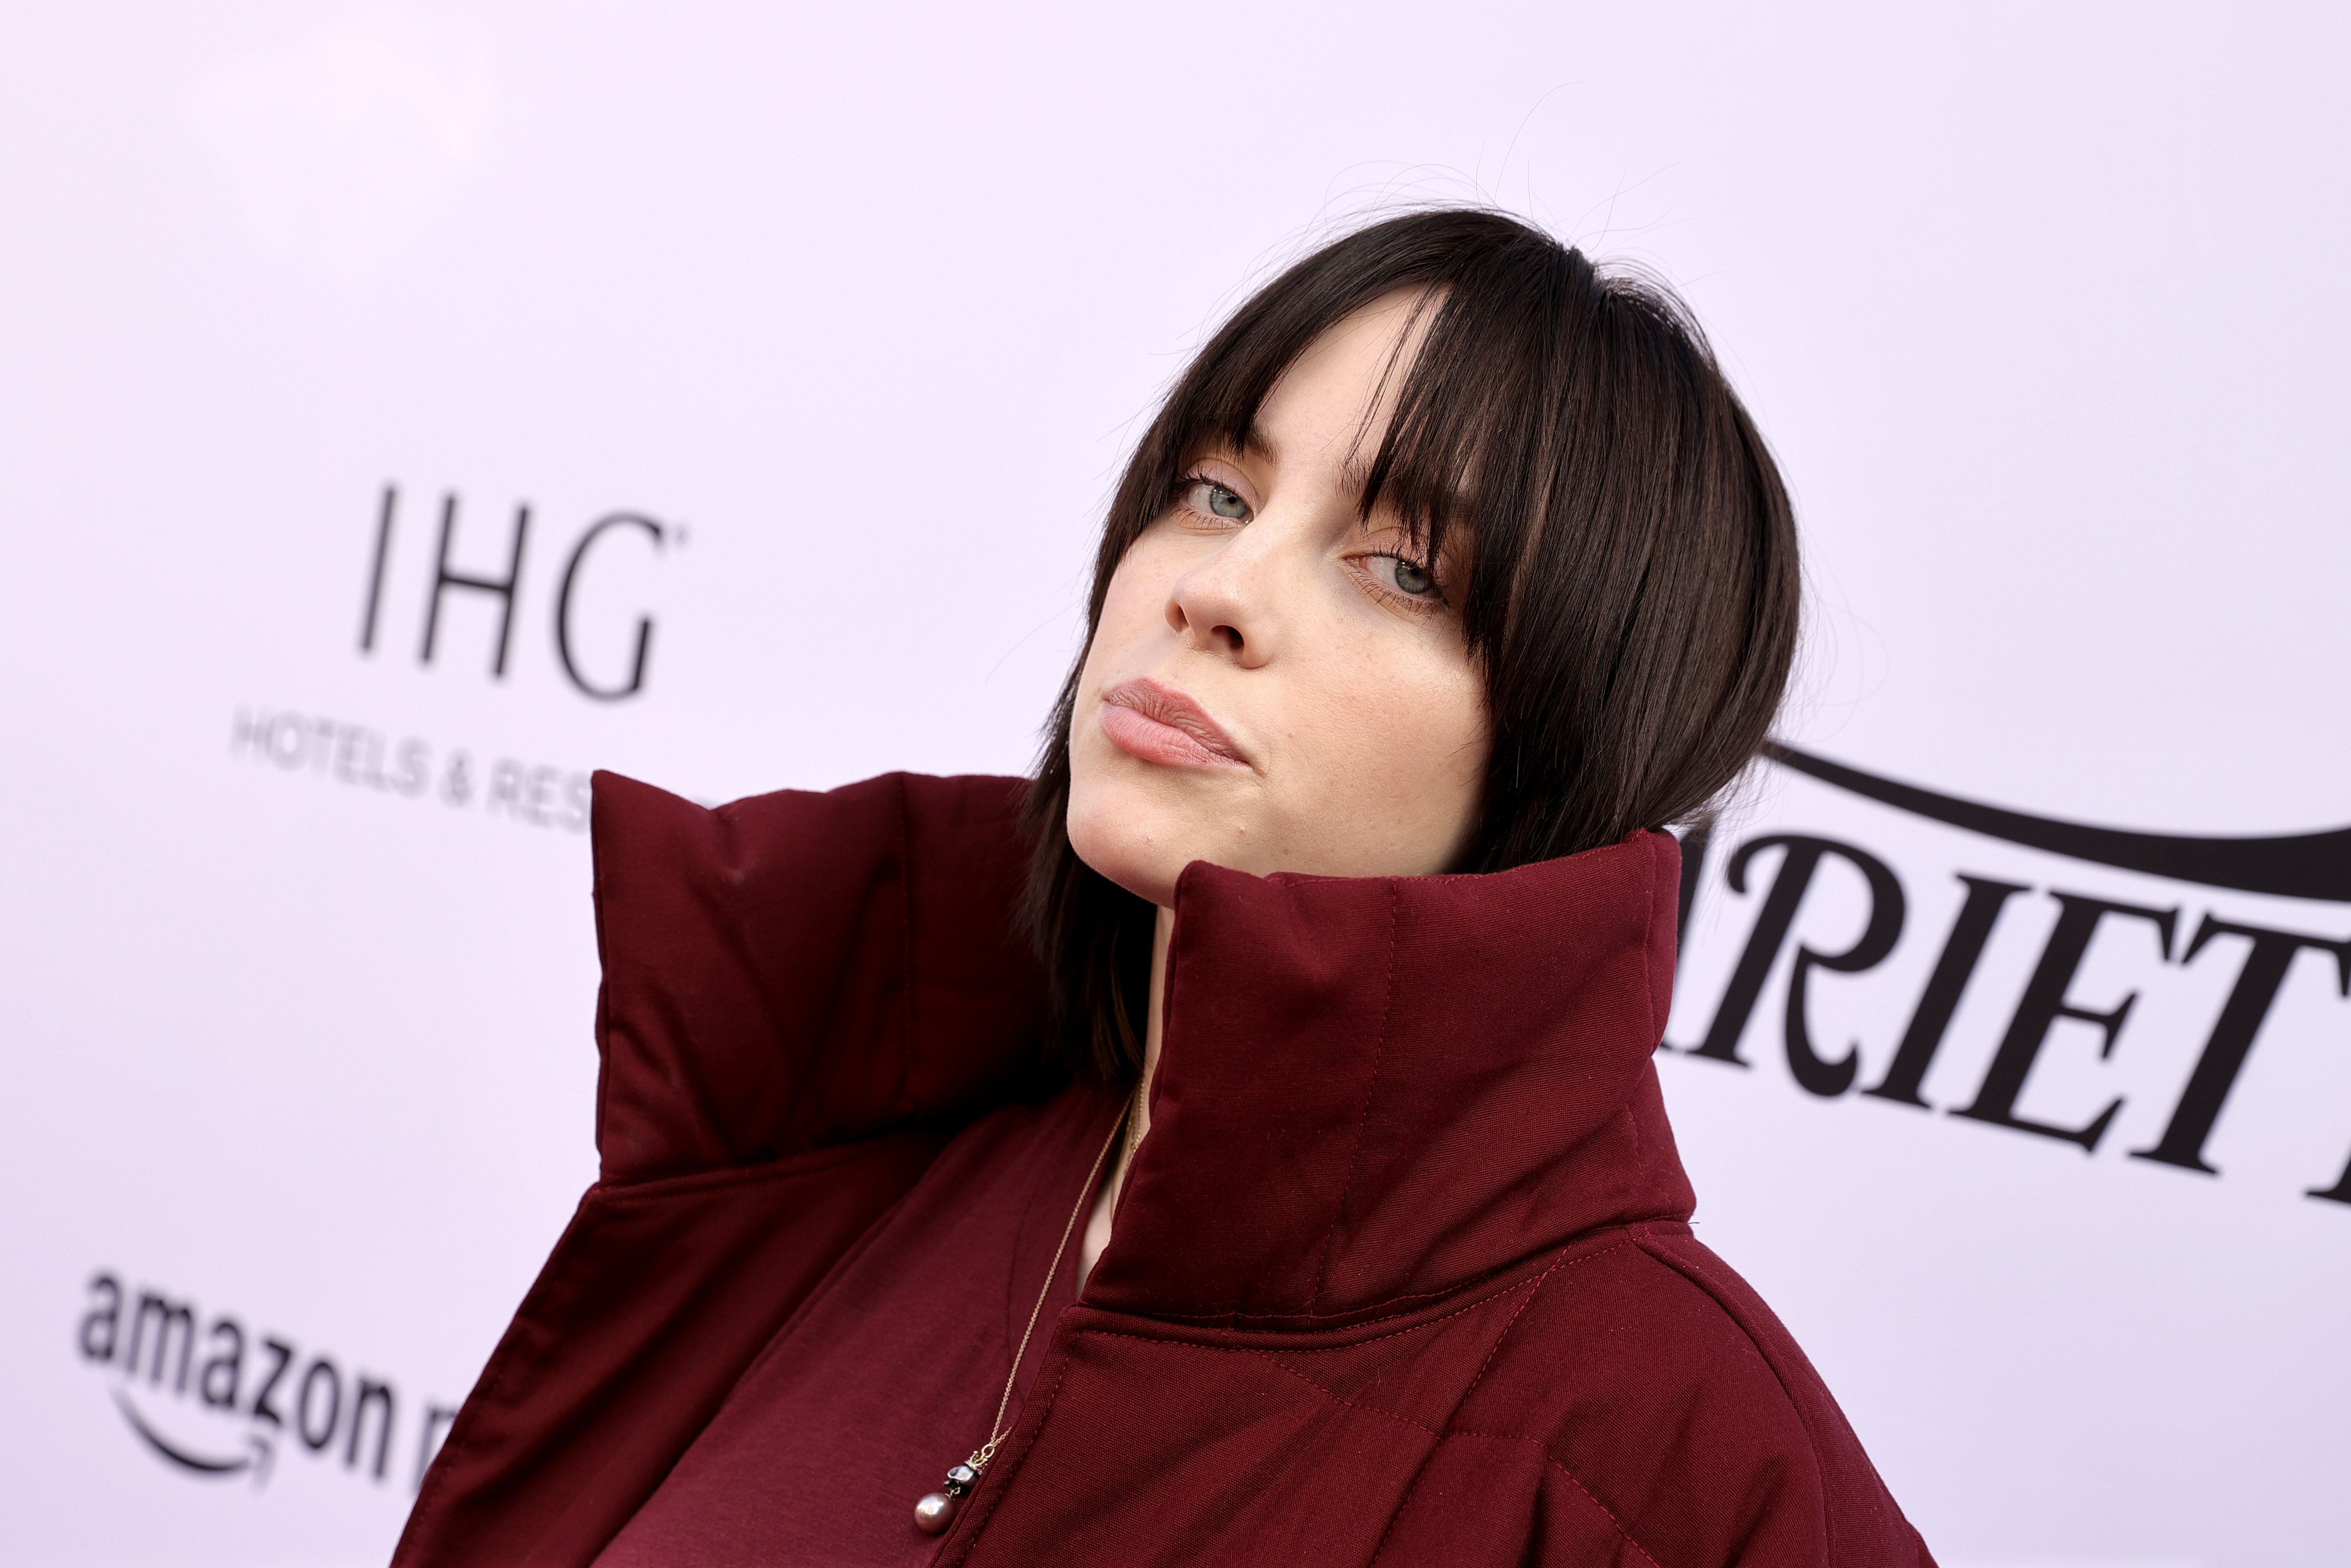 Billie Eilish attends Variety's Hitmakers Brunch presented by Peacock and Girls5eva dressed in a dark red coat and shirt with brown hair